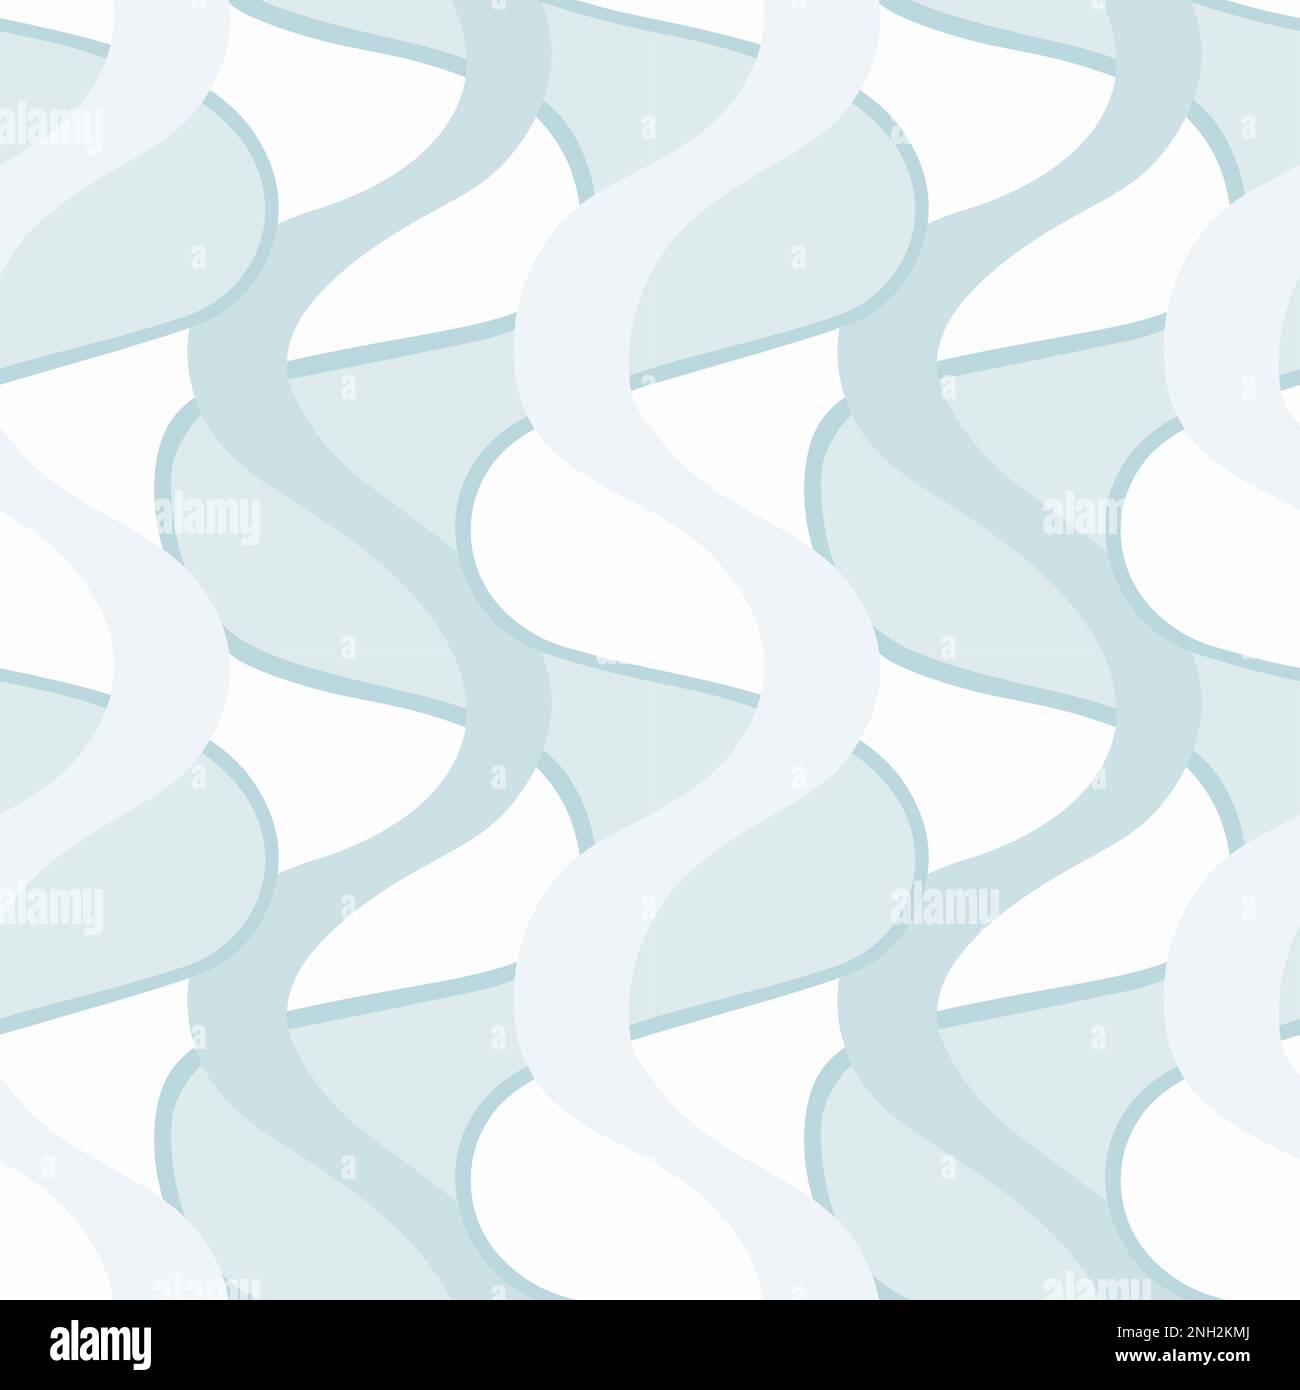 Undulating seamlessly repeating wallpaper pattern Stock Photo